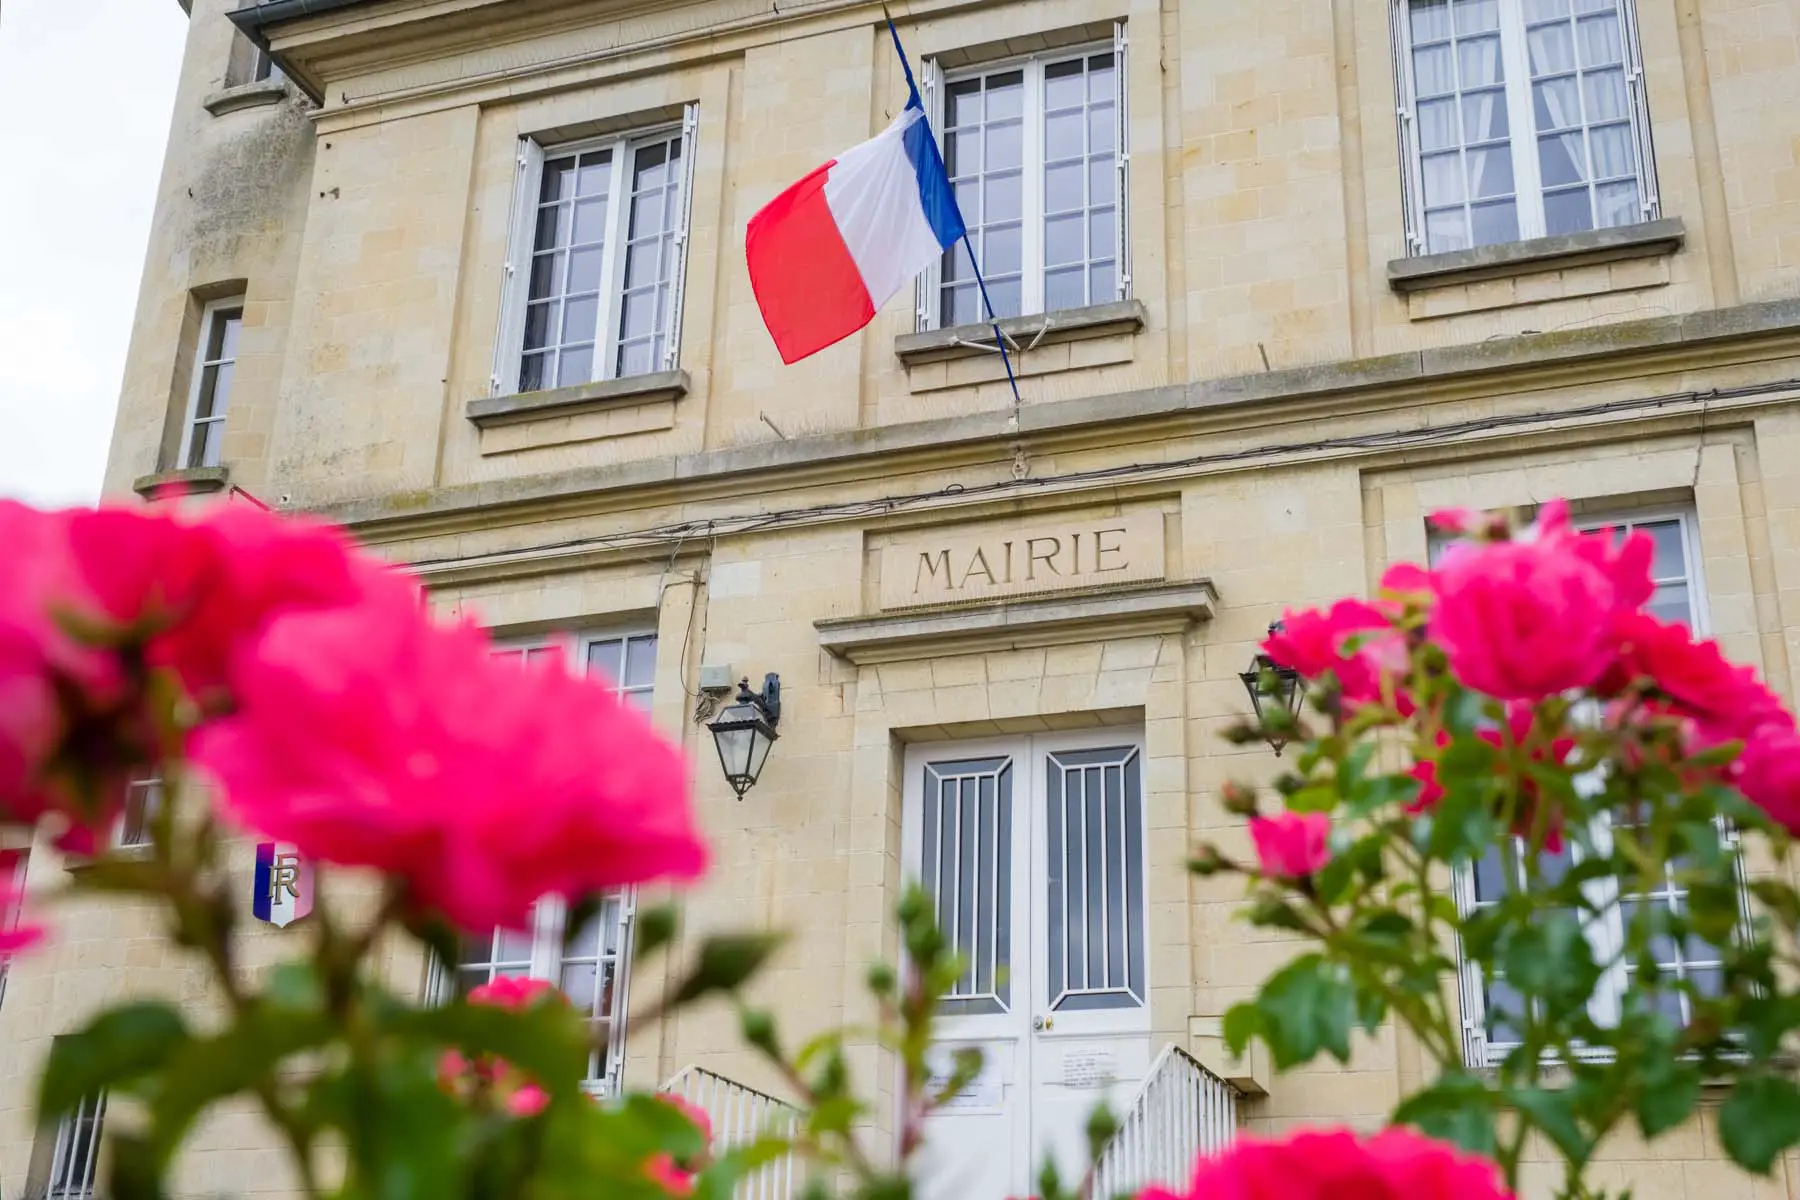 French town hall